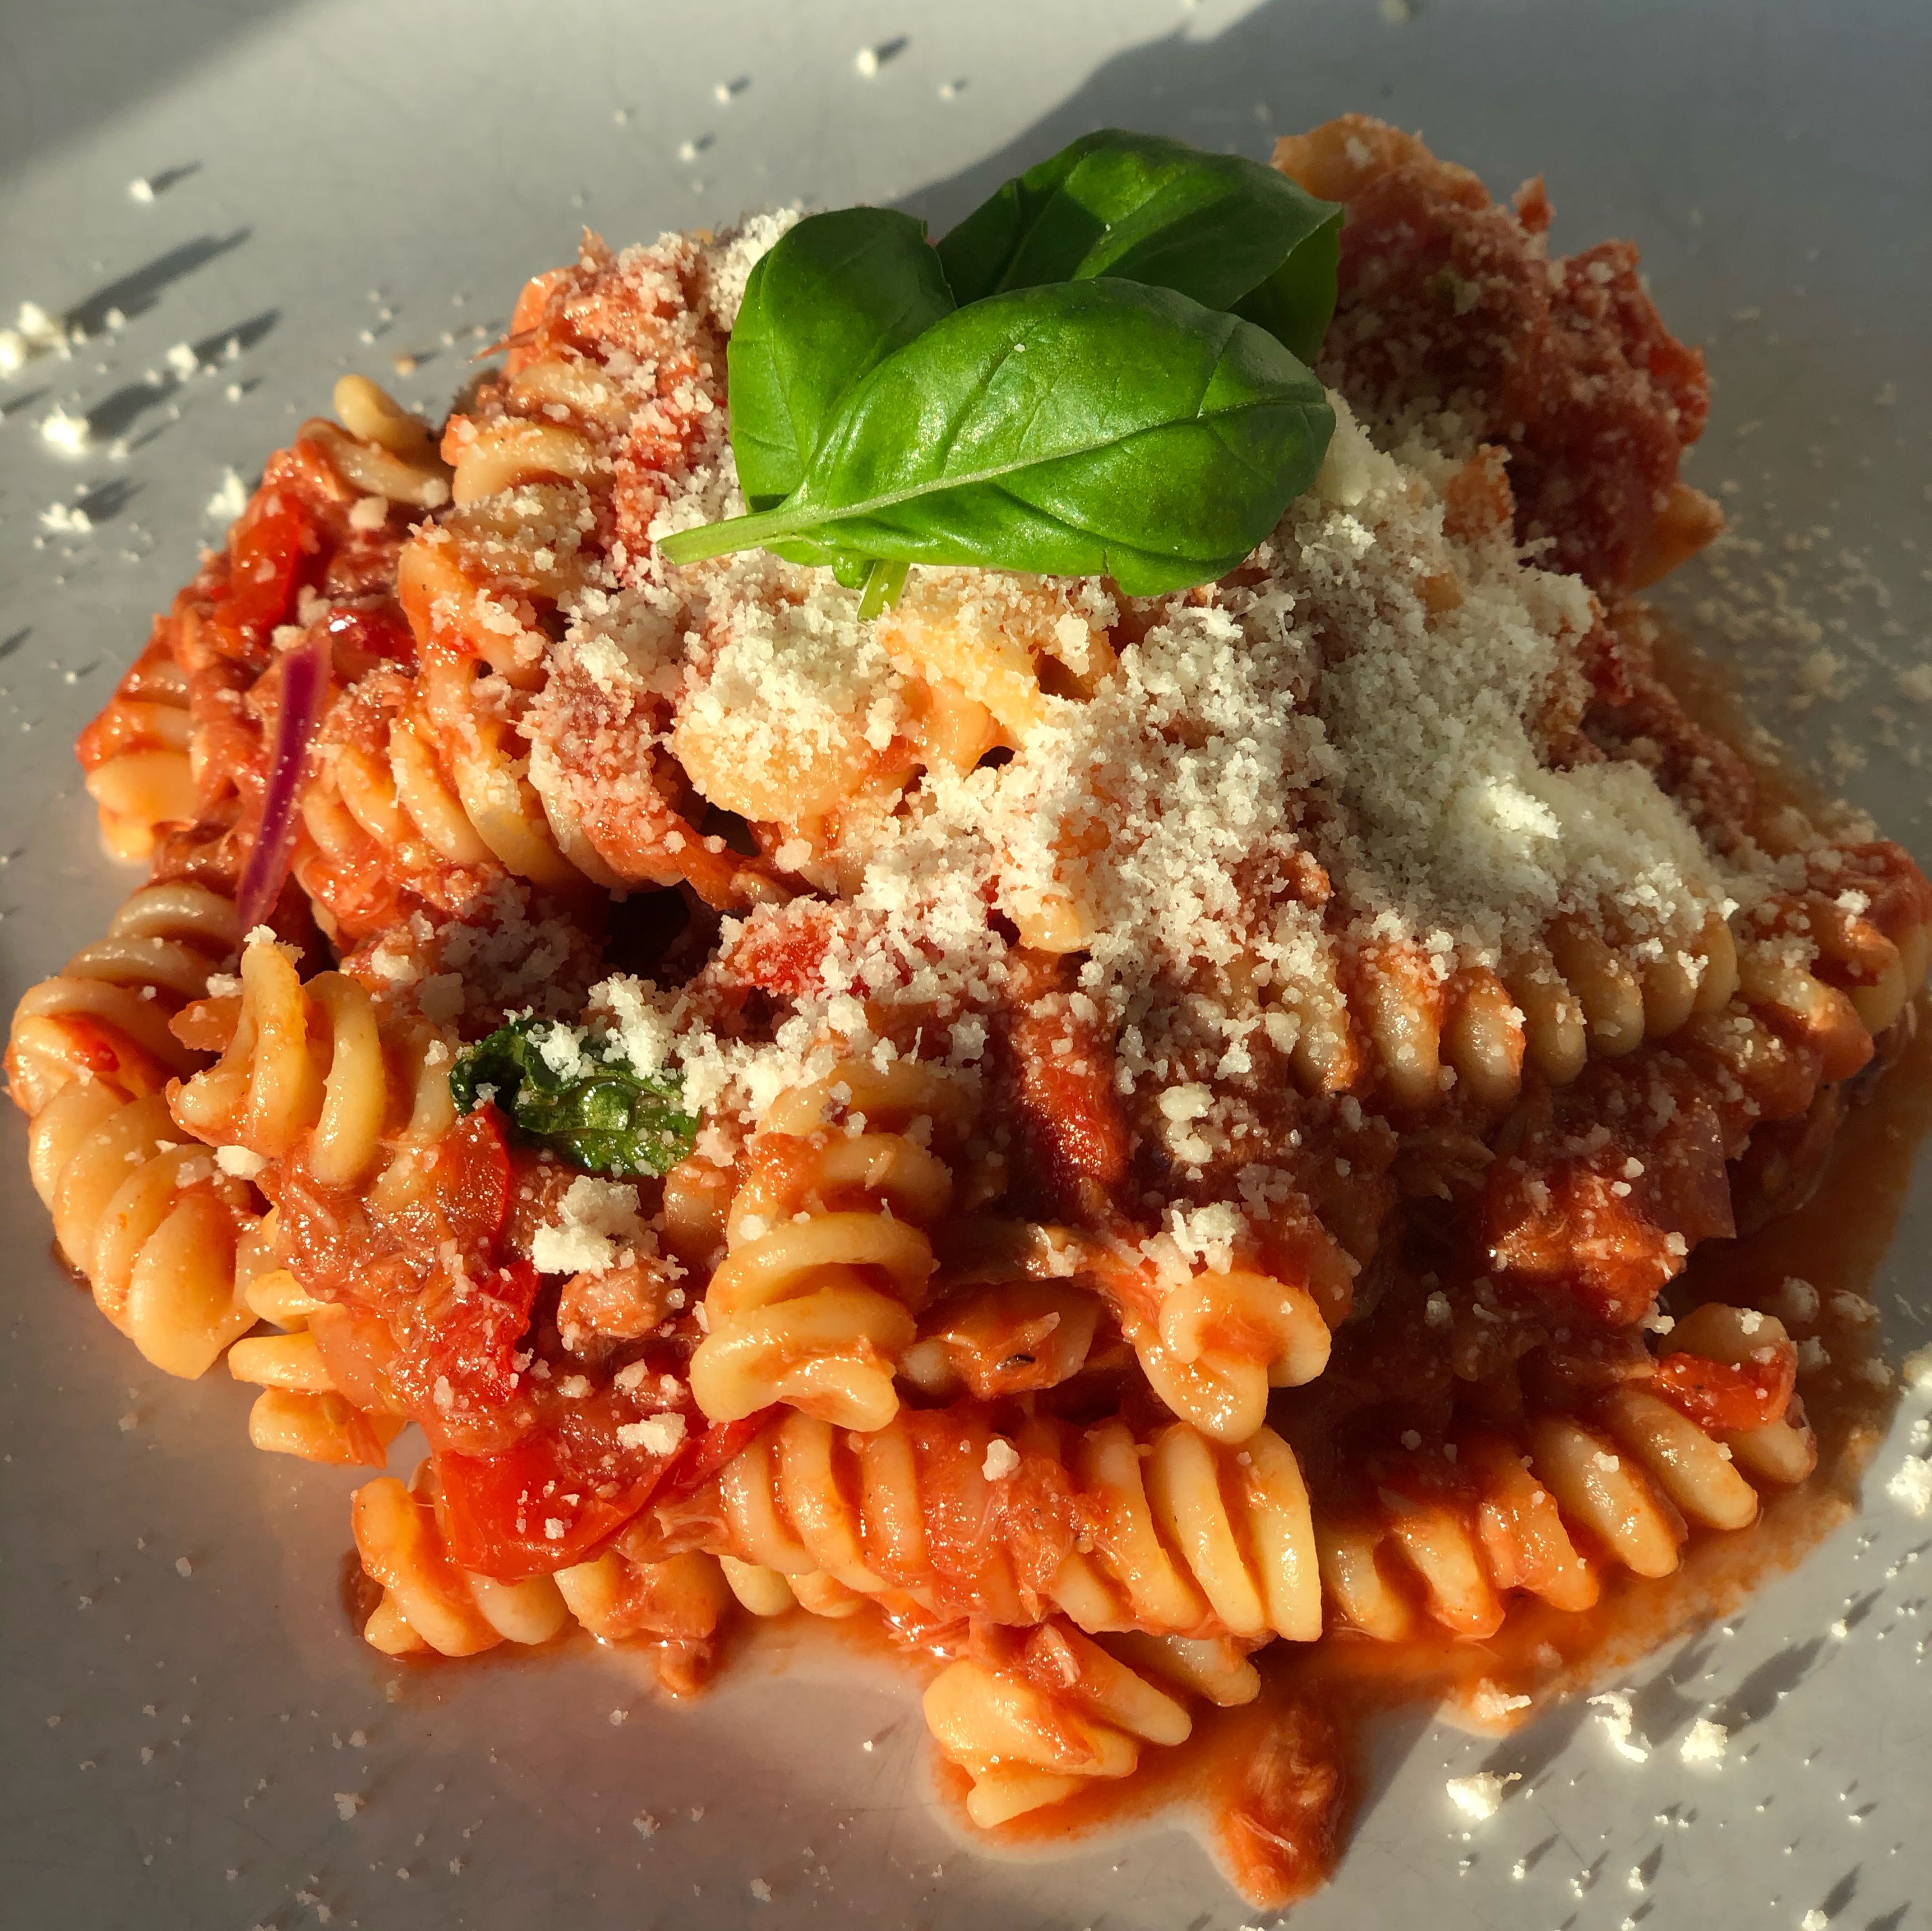 Put the pasta on a plate and add Parmesan and basil to your own liking!